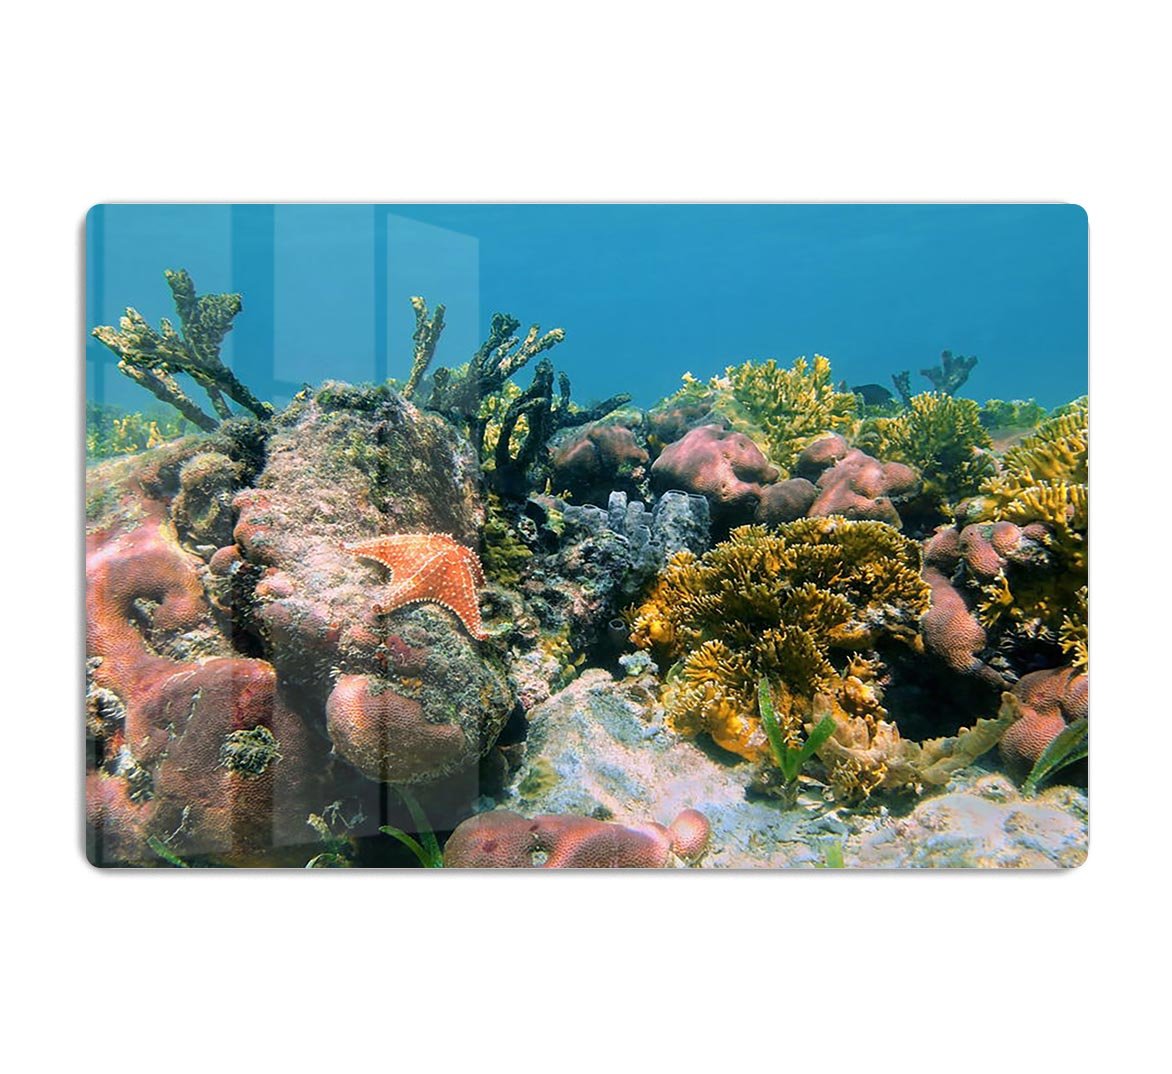 Underwater reef in the Caribbean sea with corals sponges and a starfish HD Metal Print - Canvas Art Rocks - 1